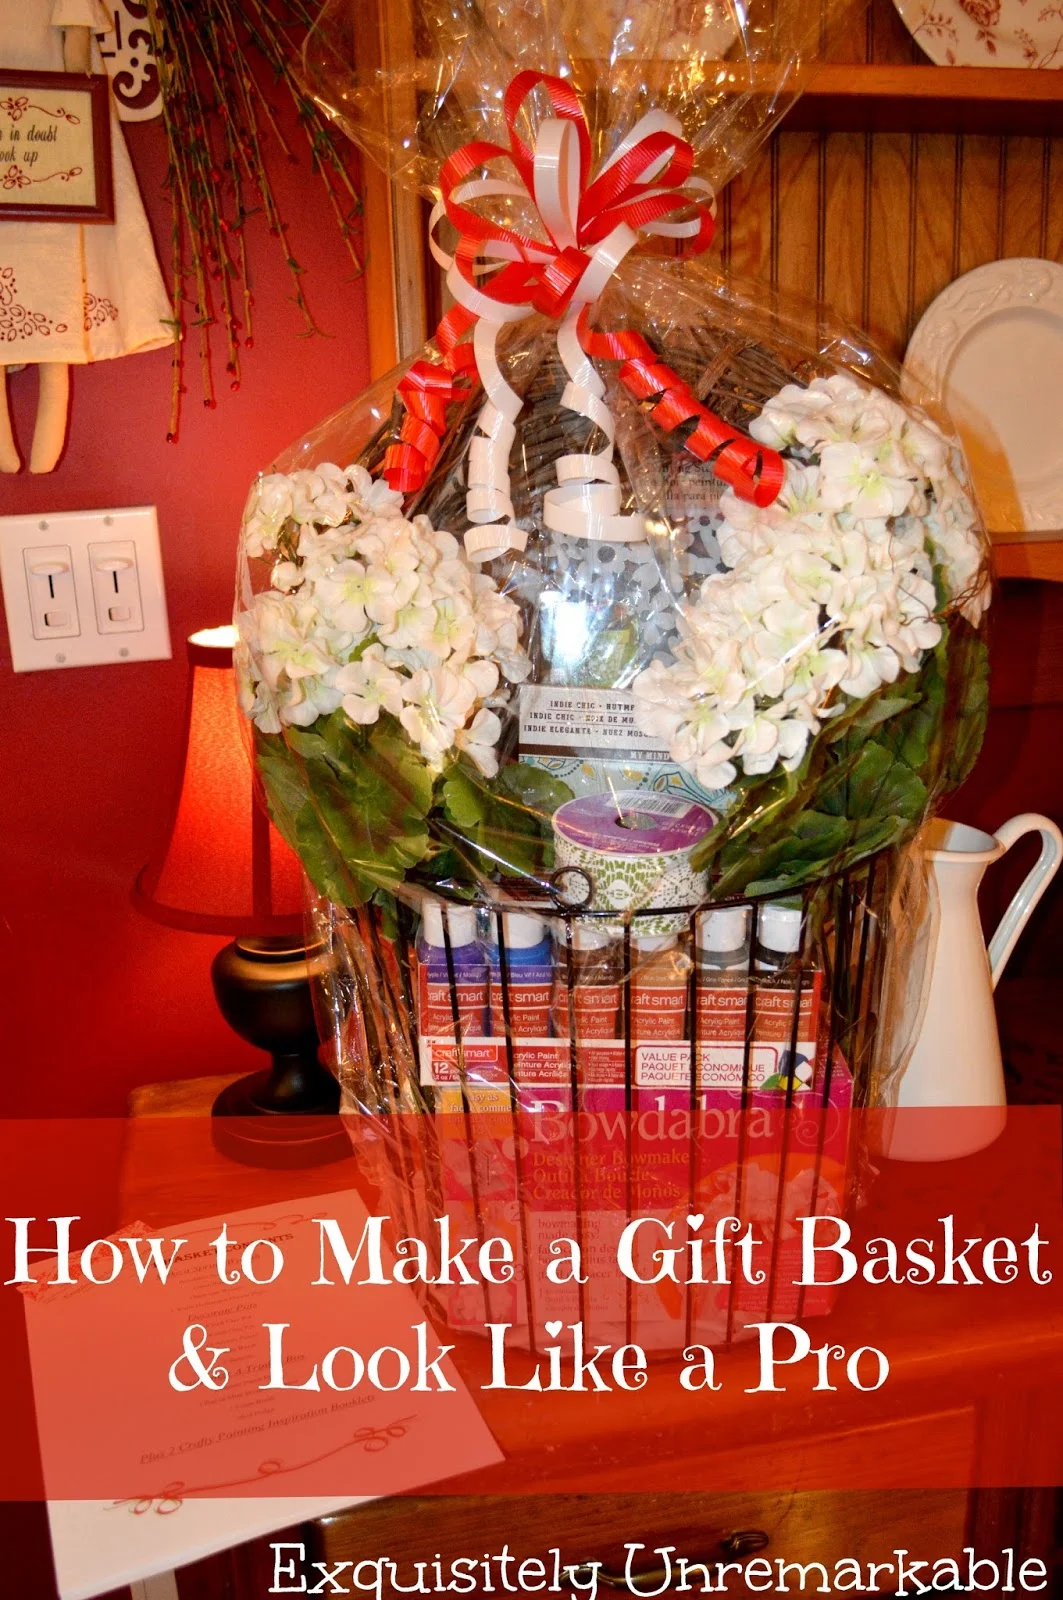 Create a gift basket and look like a pro